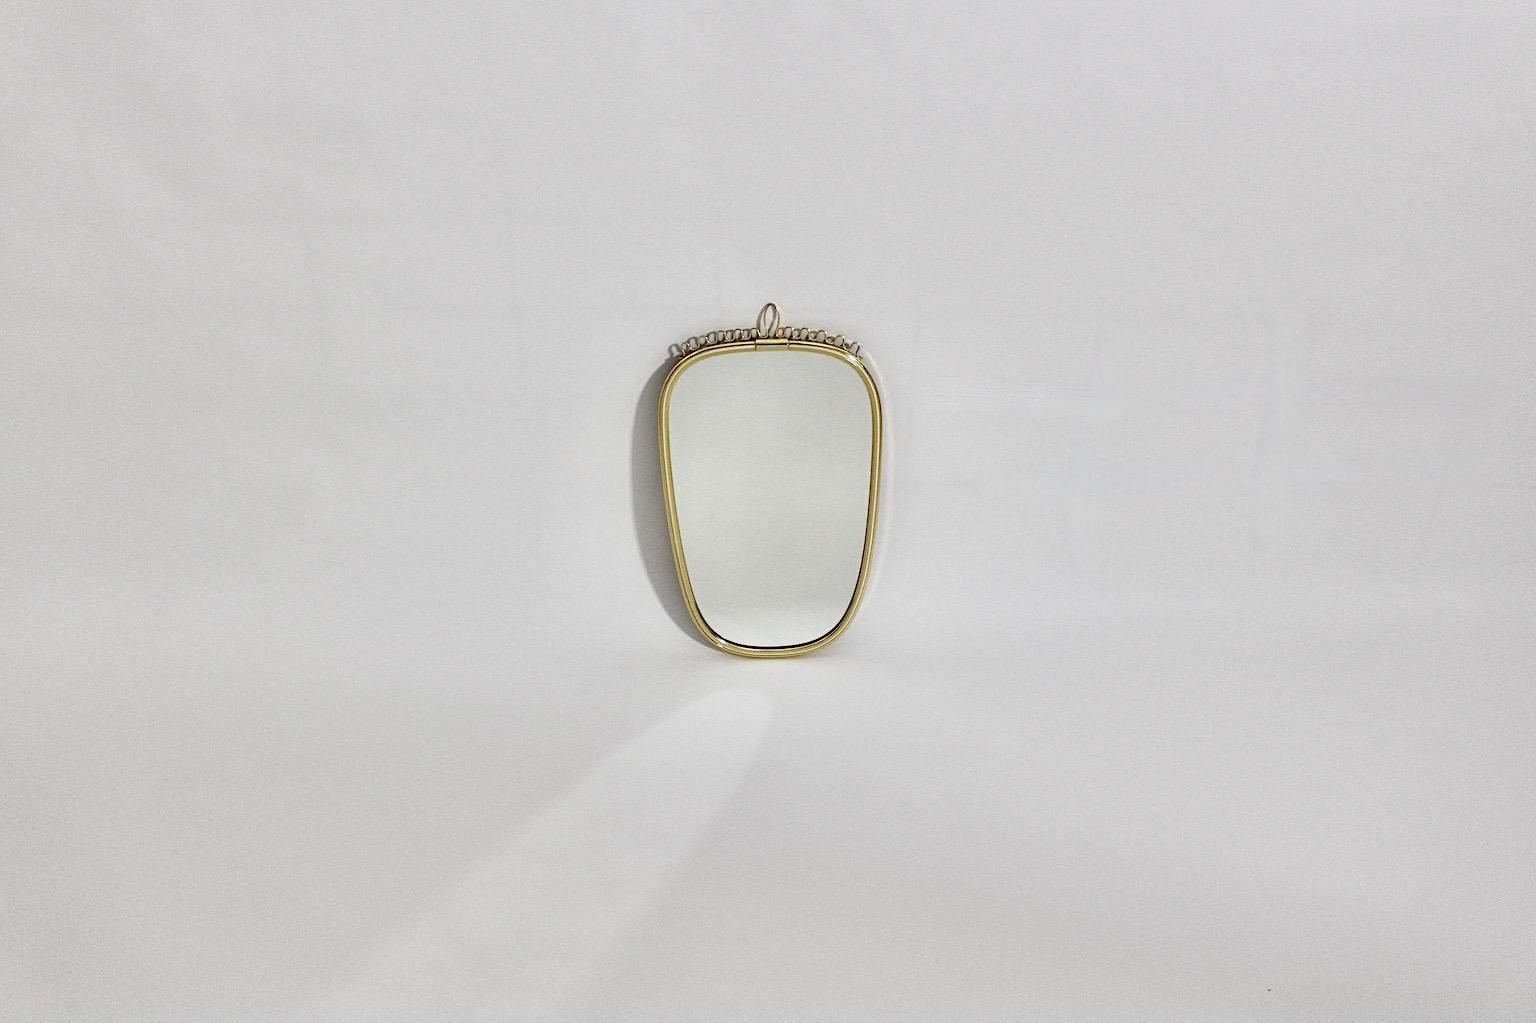 Mid-Century Modern Vintage Brass Oval Wall Mirror, 1960s, Germany For Sale 2